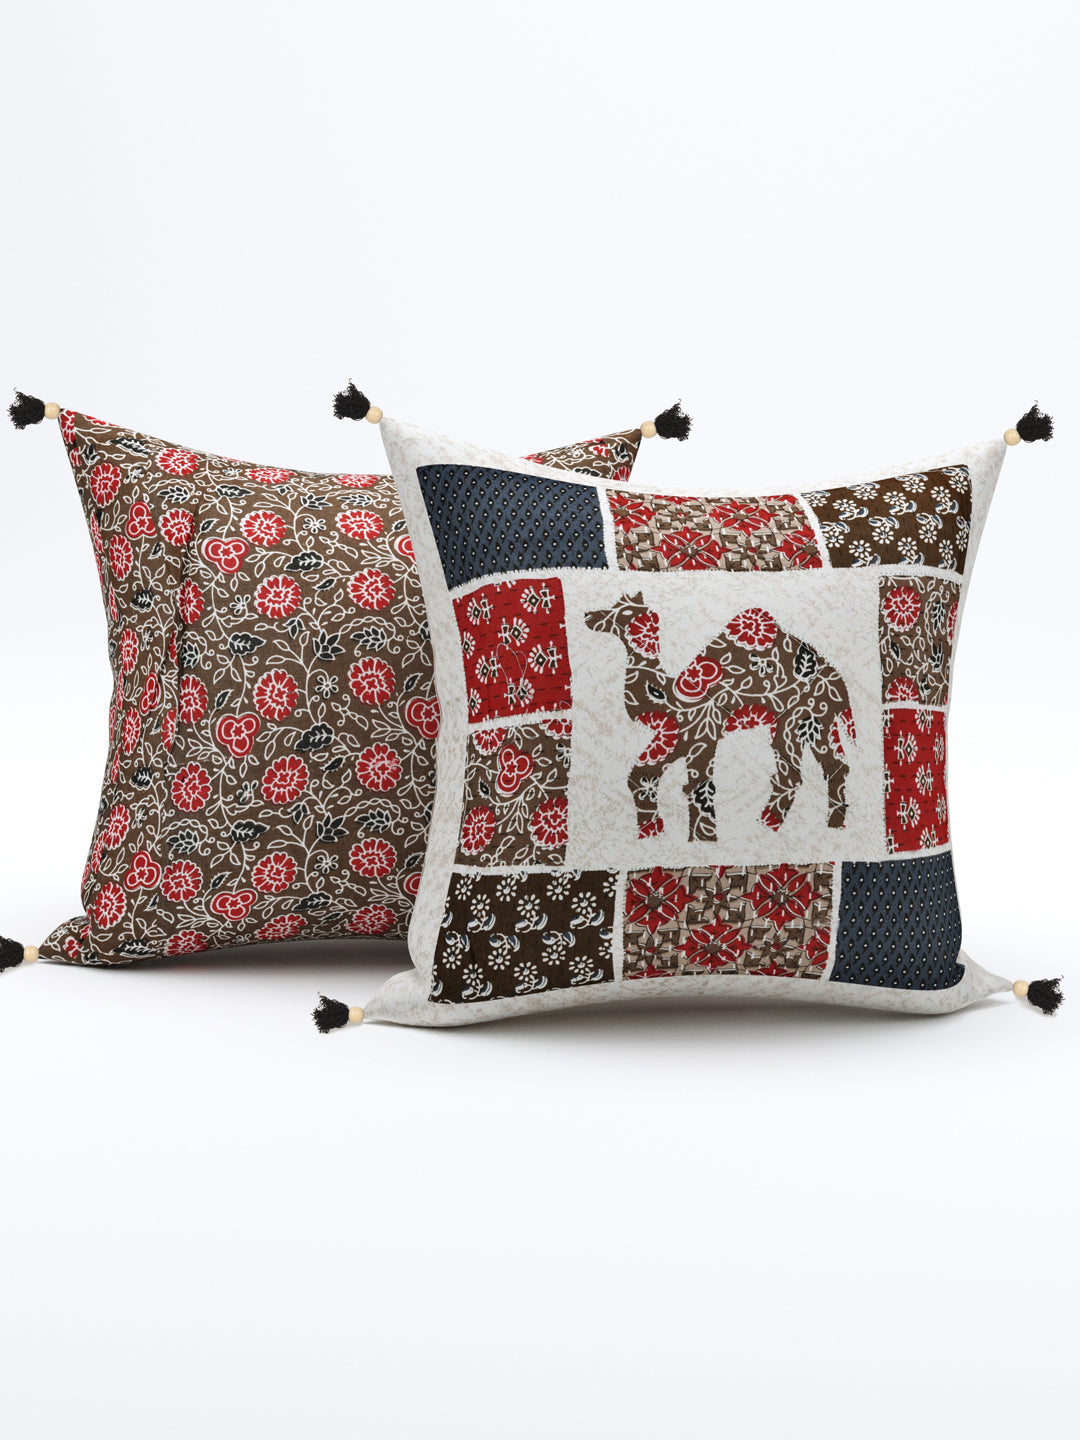 Living Roots Camel Patchwork Cotton Cushion Cover- Set of 5 (40-026-C)